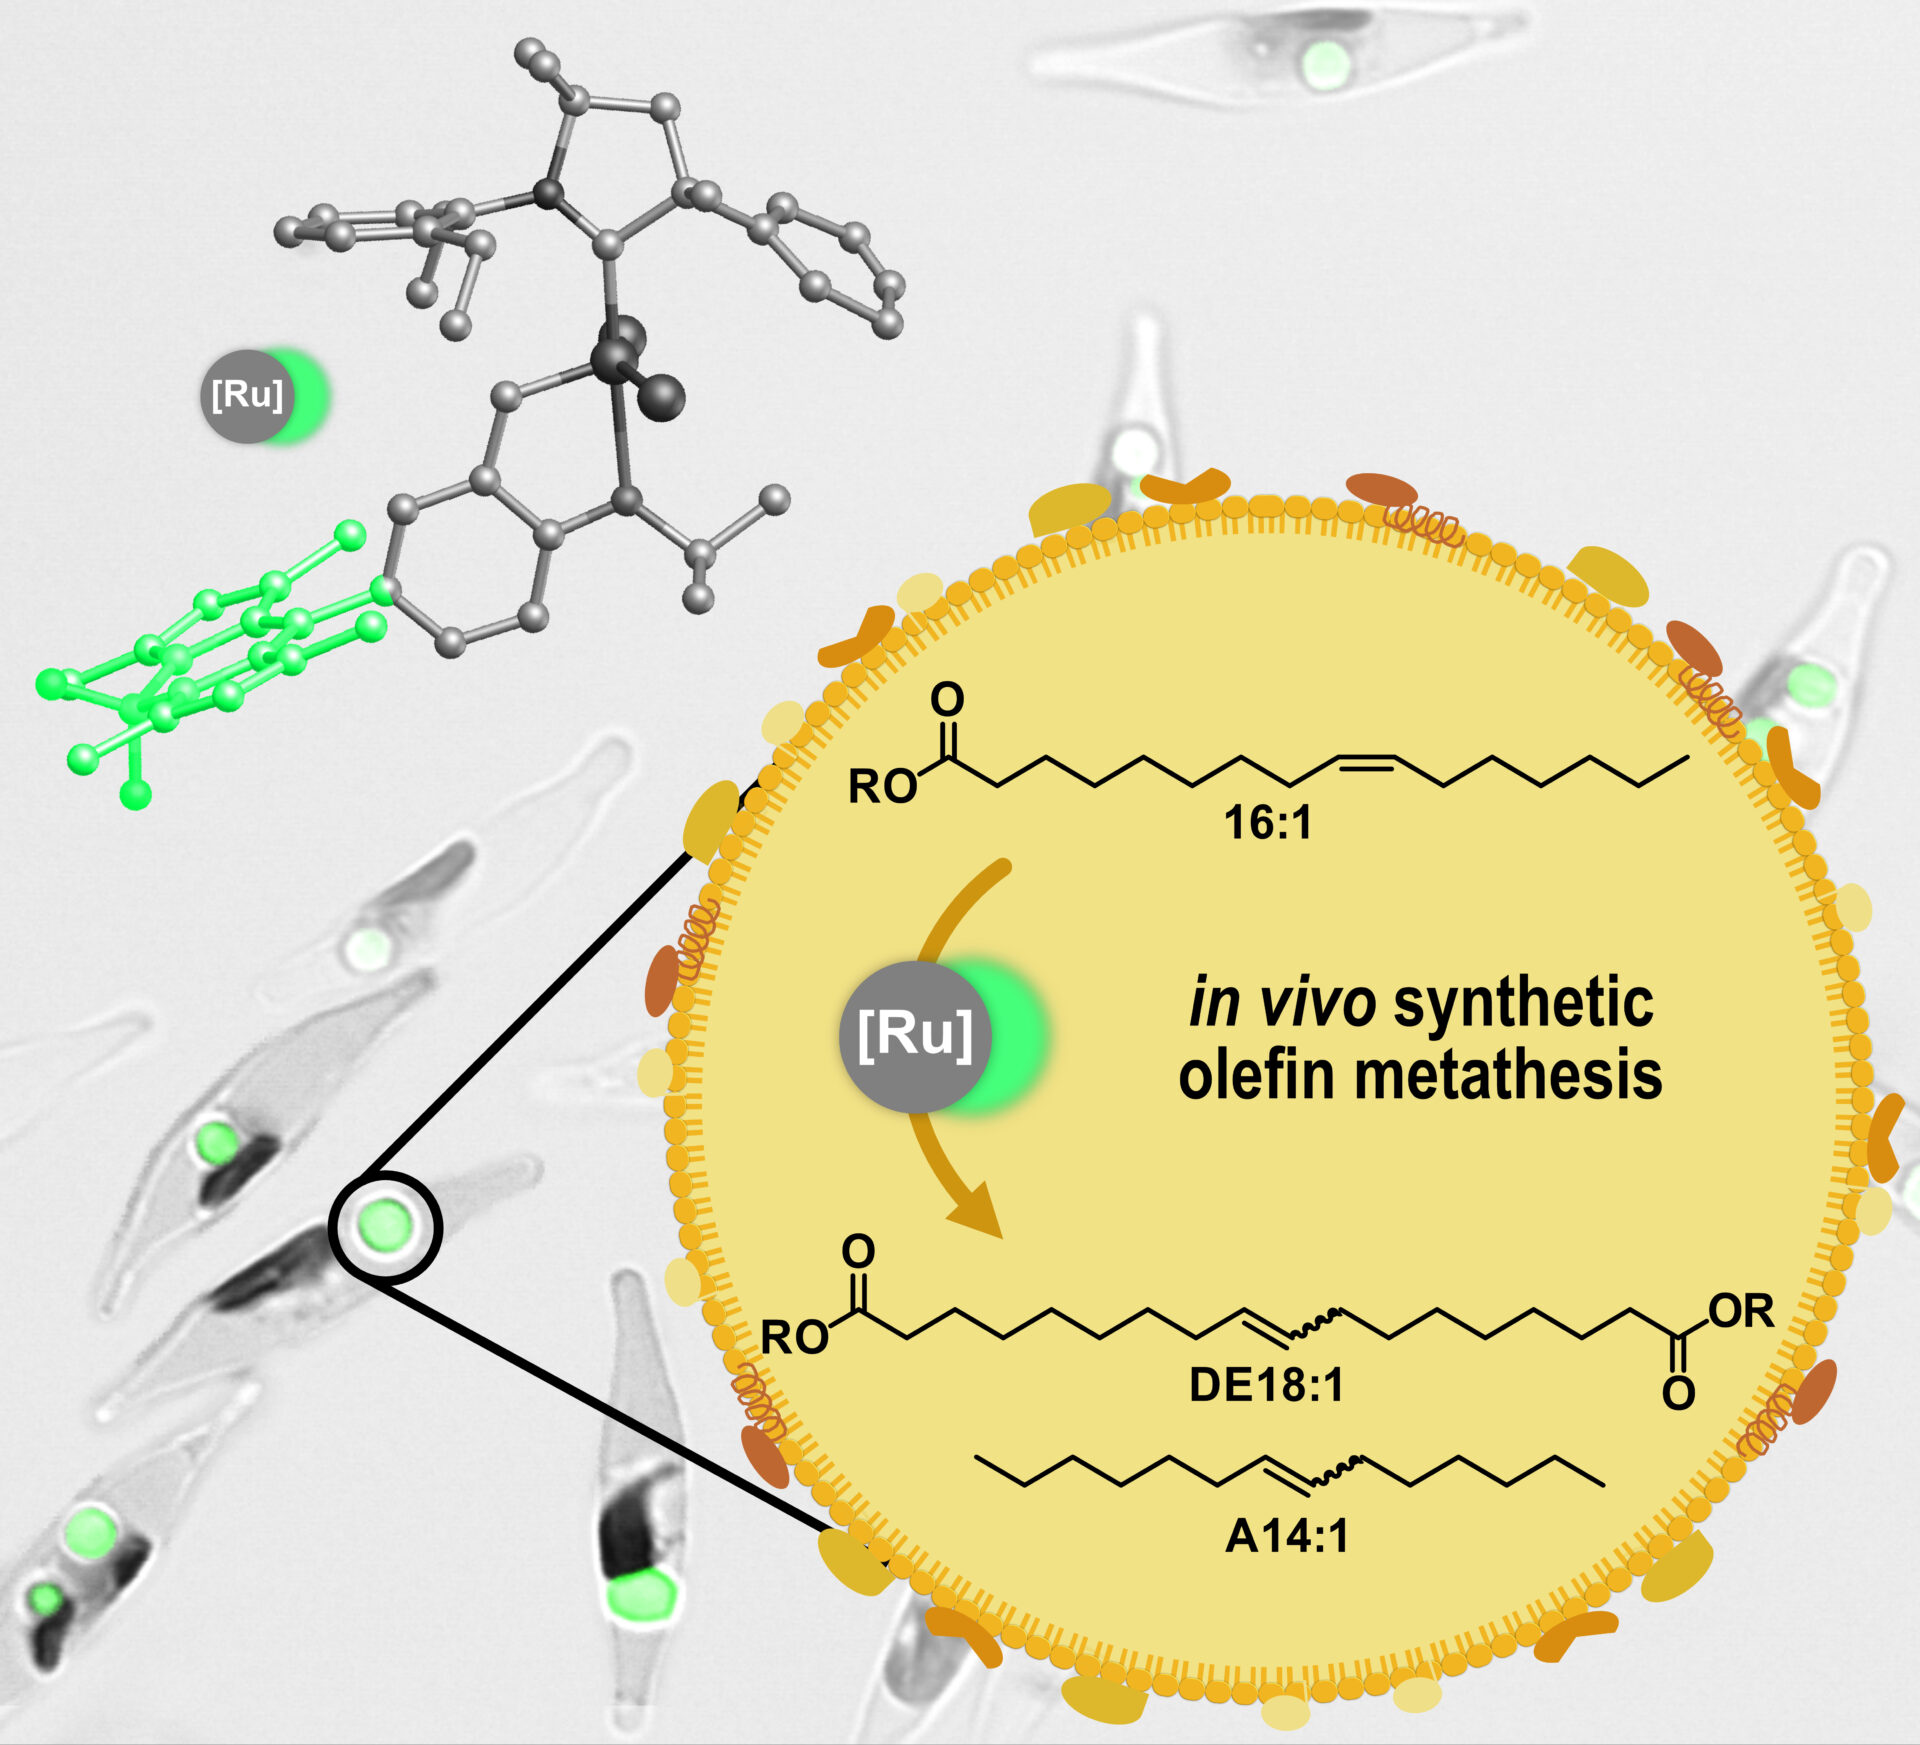 Catalytic olefin metathesis can be performed in living microalgae. In this process, fatty acids stored in the lipid organelles of the algae are converted into polymer building blocks and chemicals.